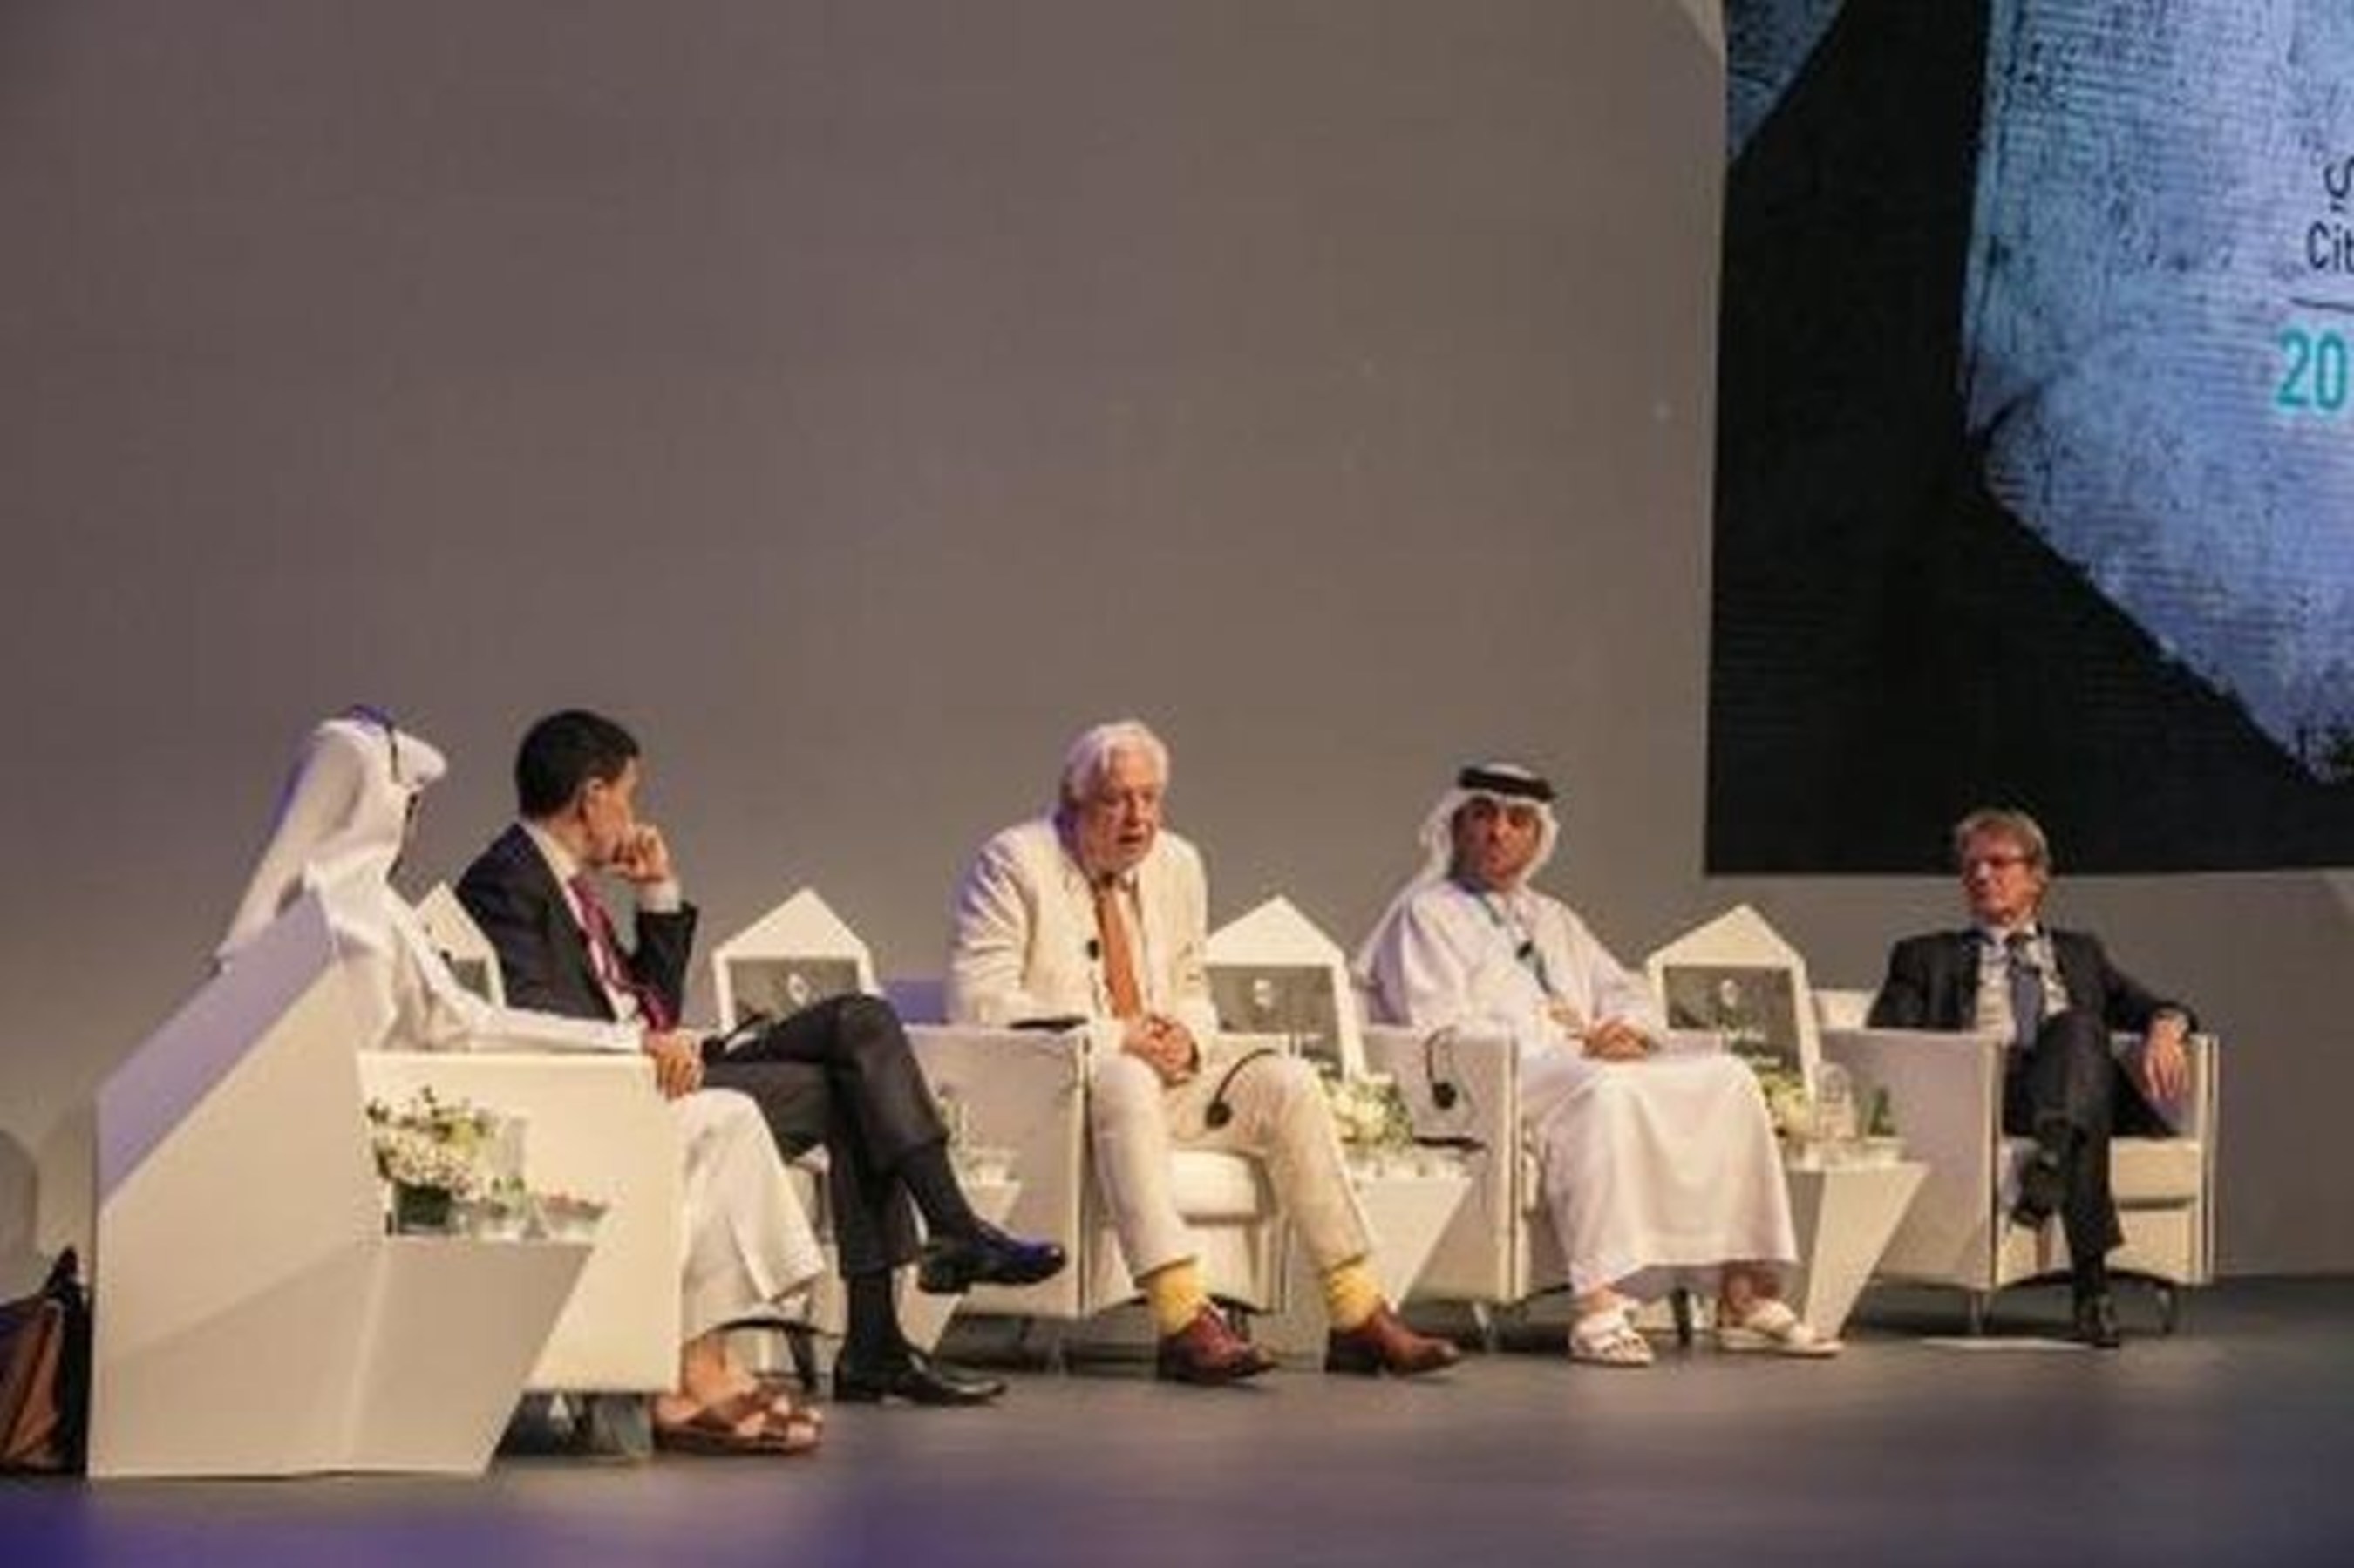 One of the sessions from IGCF 2016 (PRNewsFoto/IGCF)